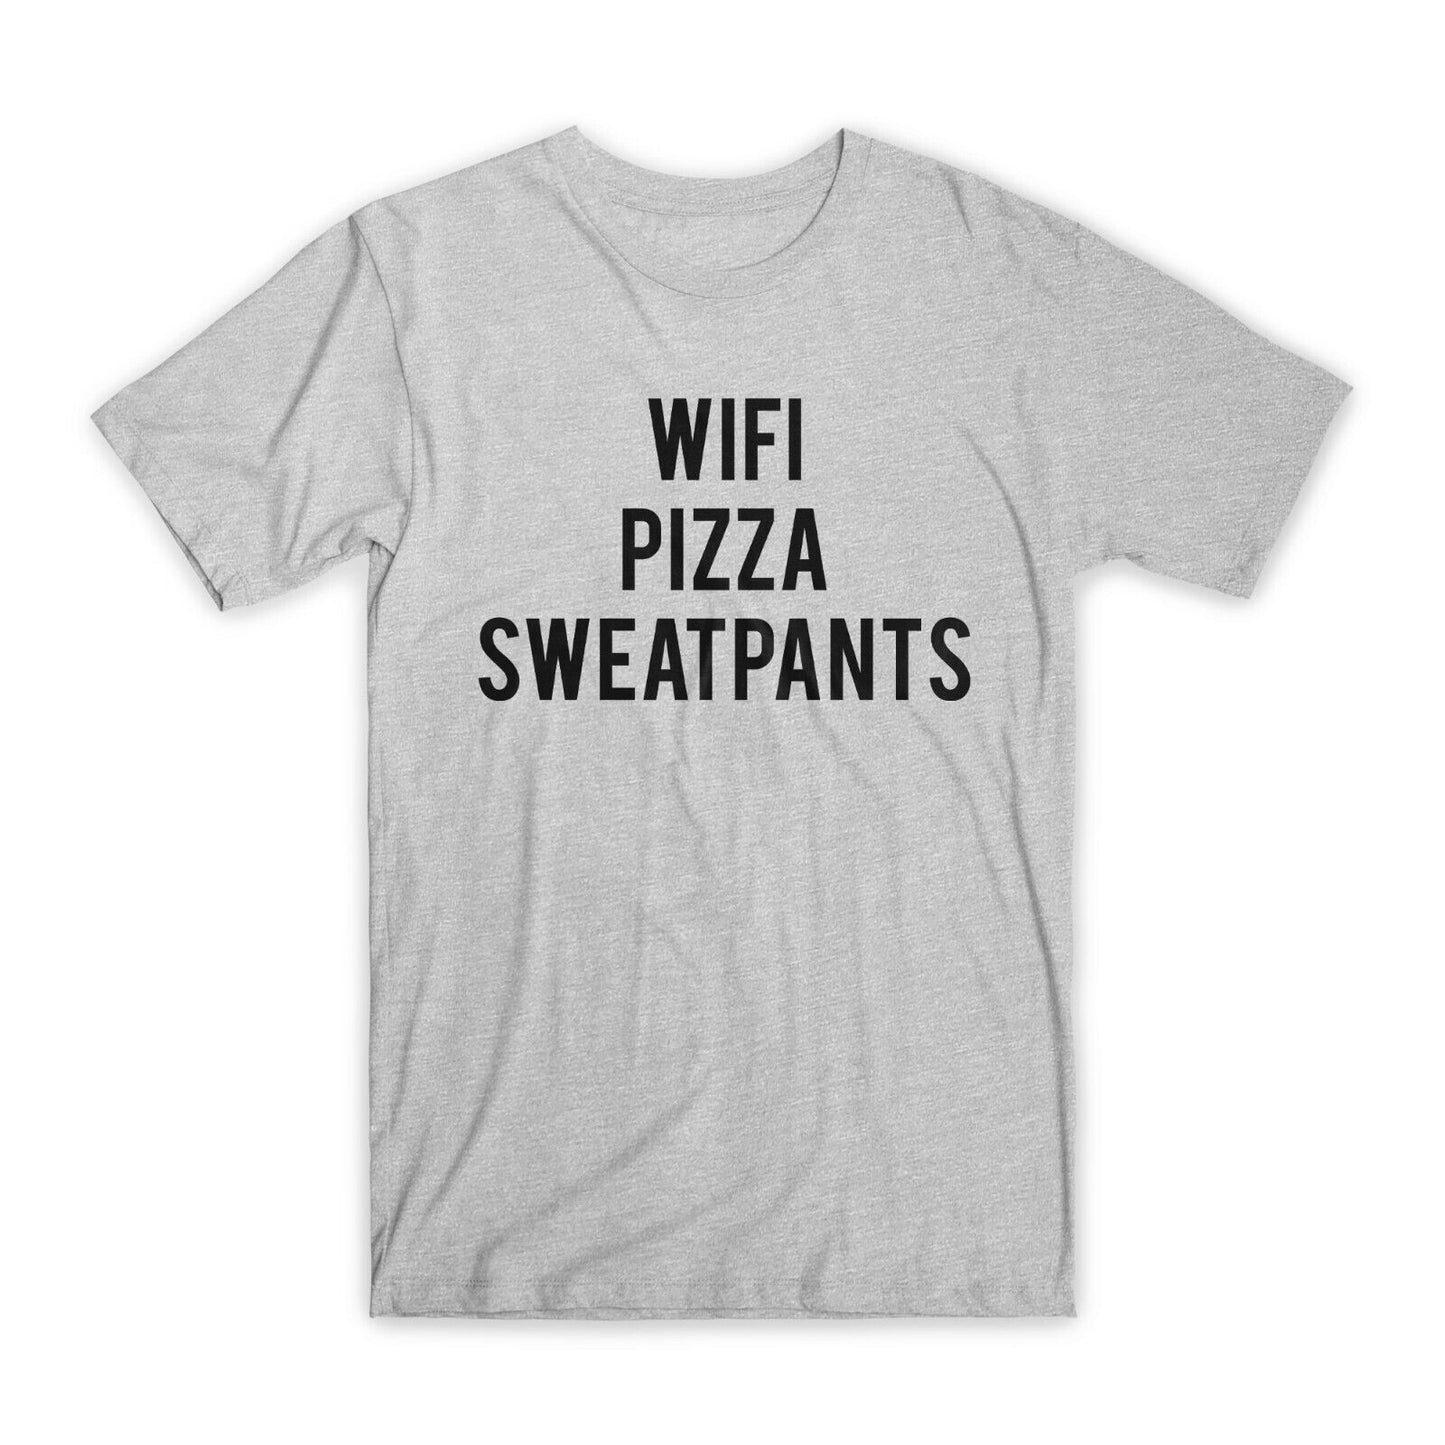 Wifi Pizza Sweatpants T-Shirt Premium Soft Cotton Crew Neck Funny Tees Gifts NEW